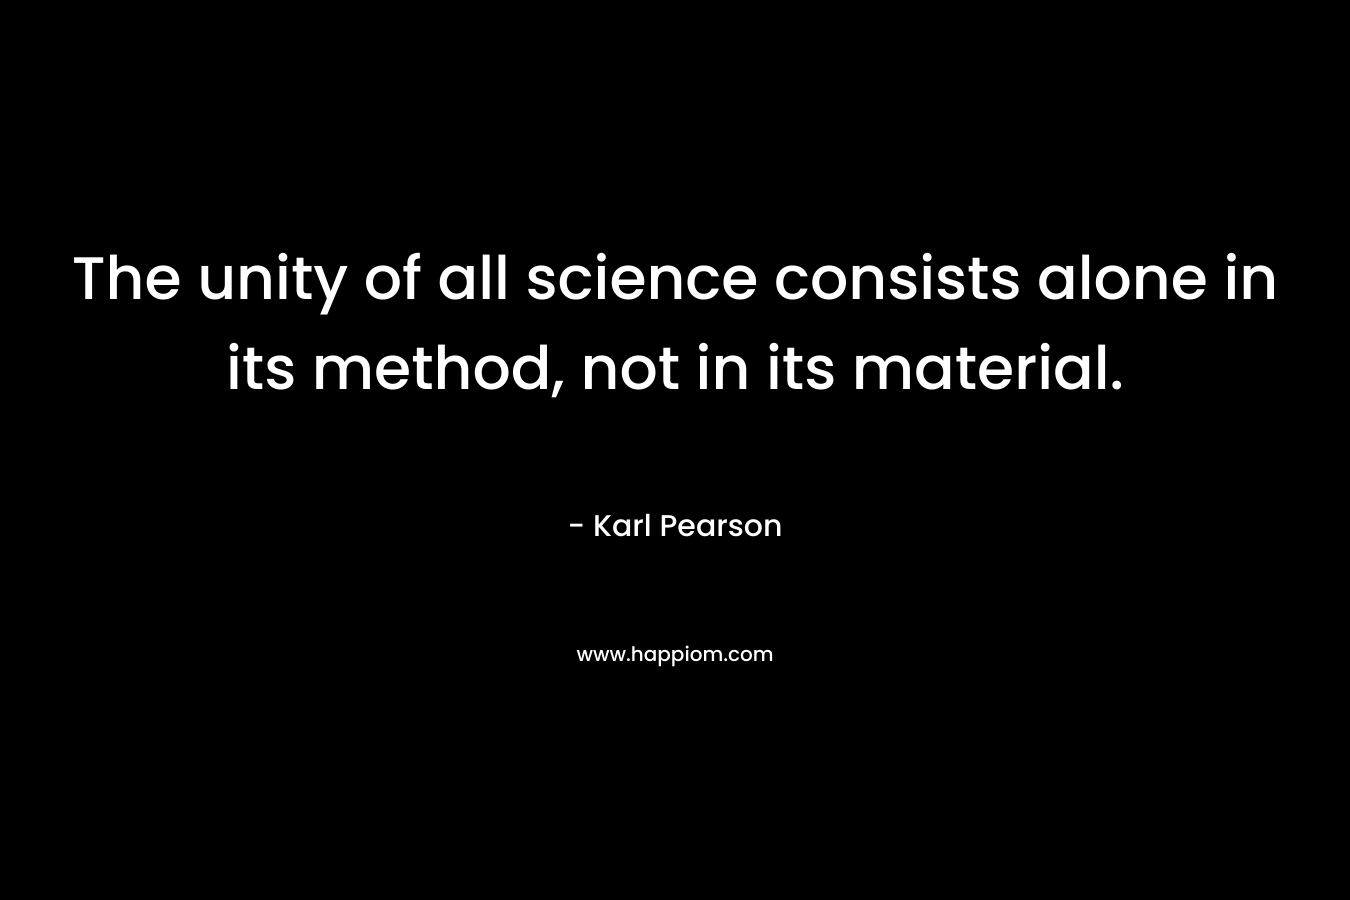 The unity of all science consists alone in its method, not in its material.